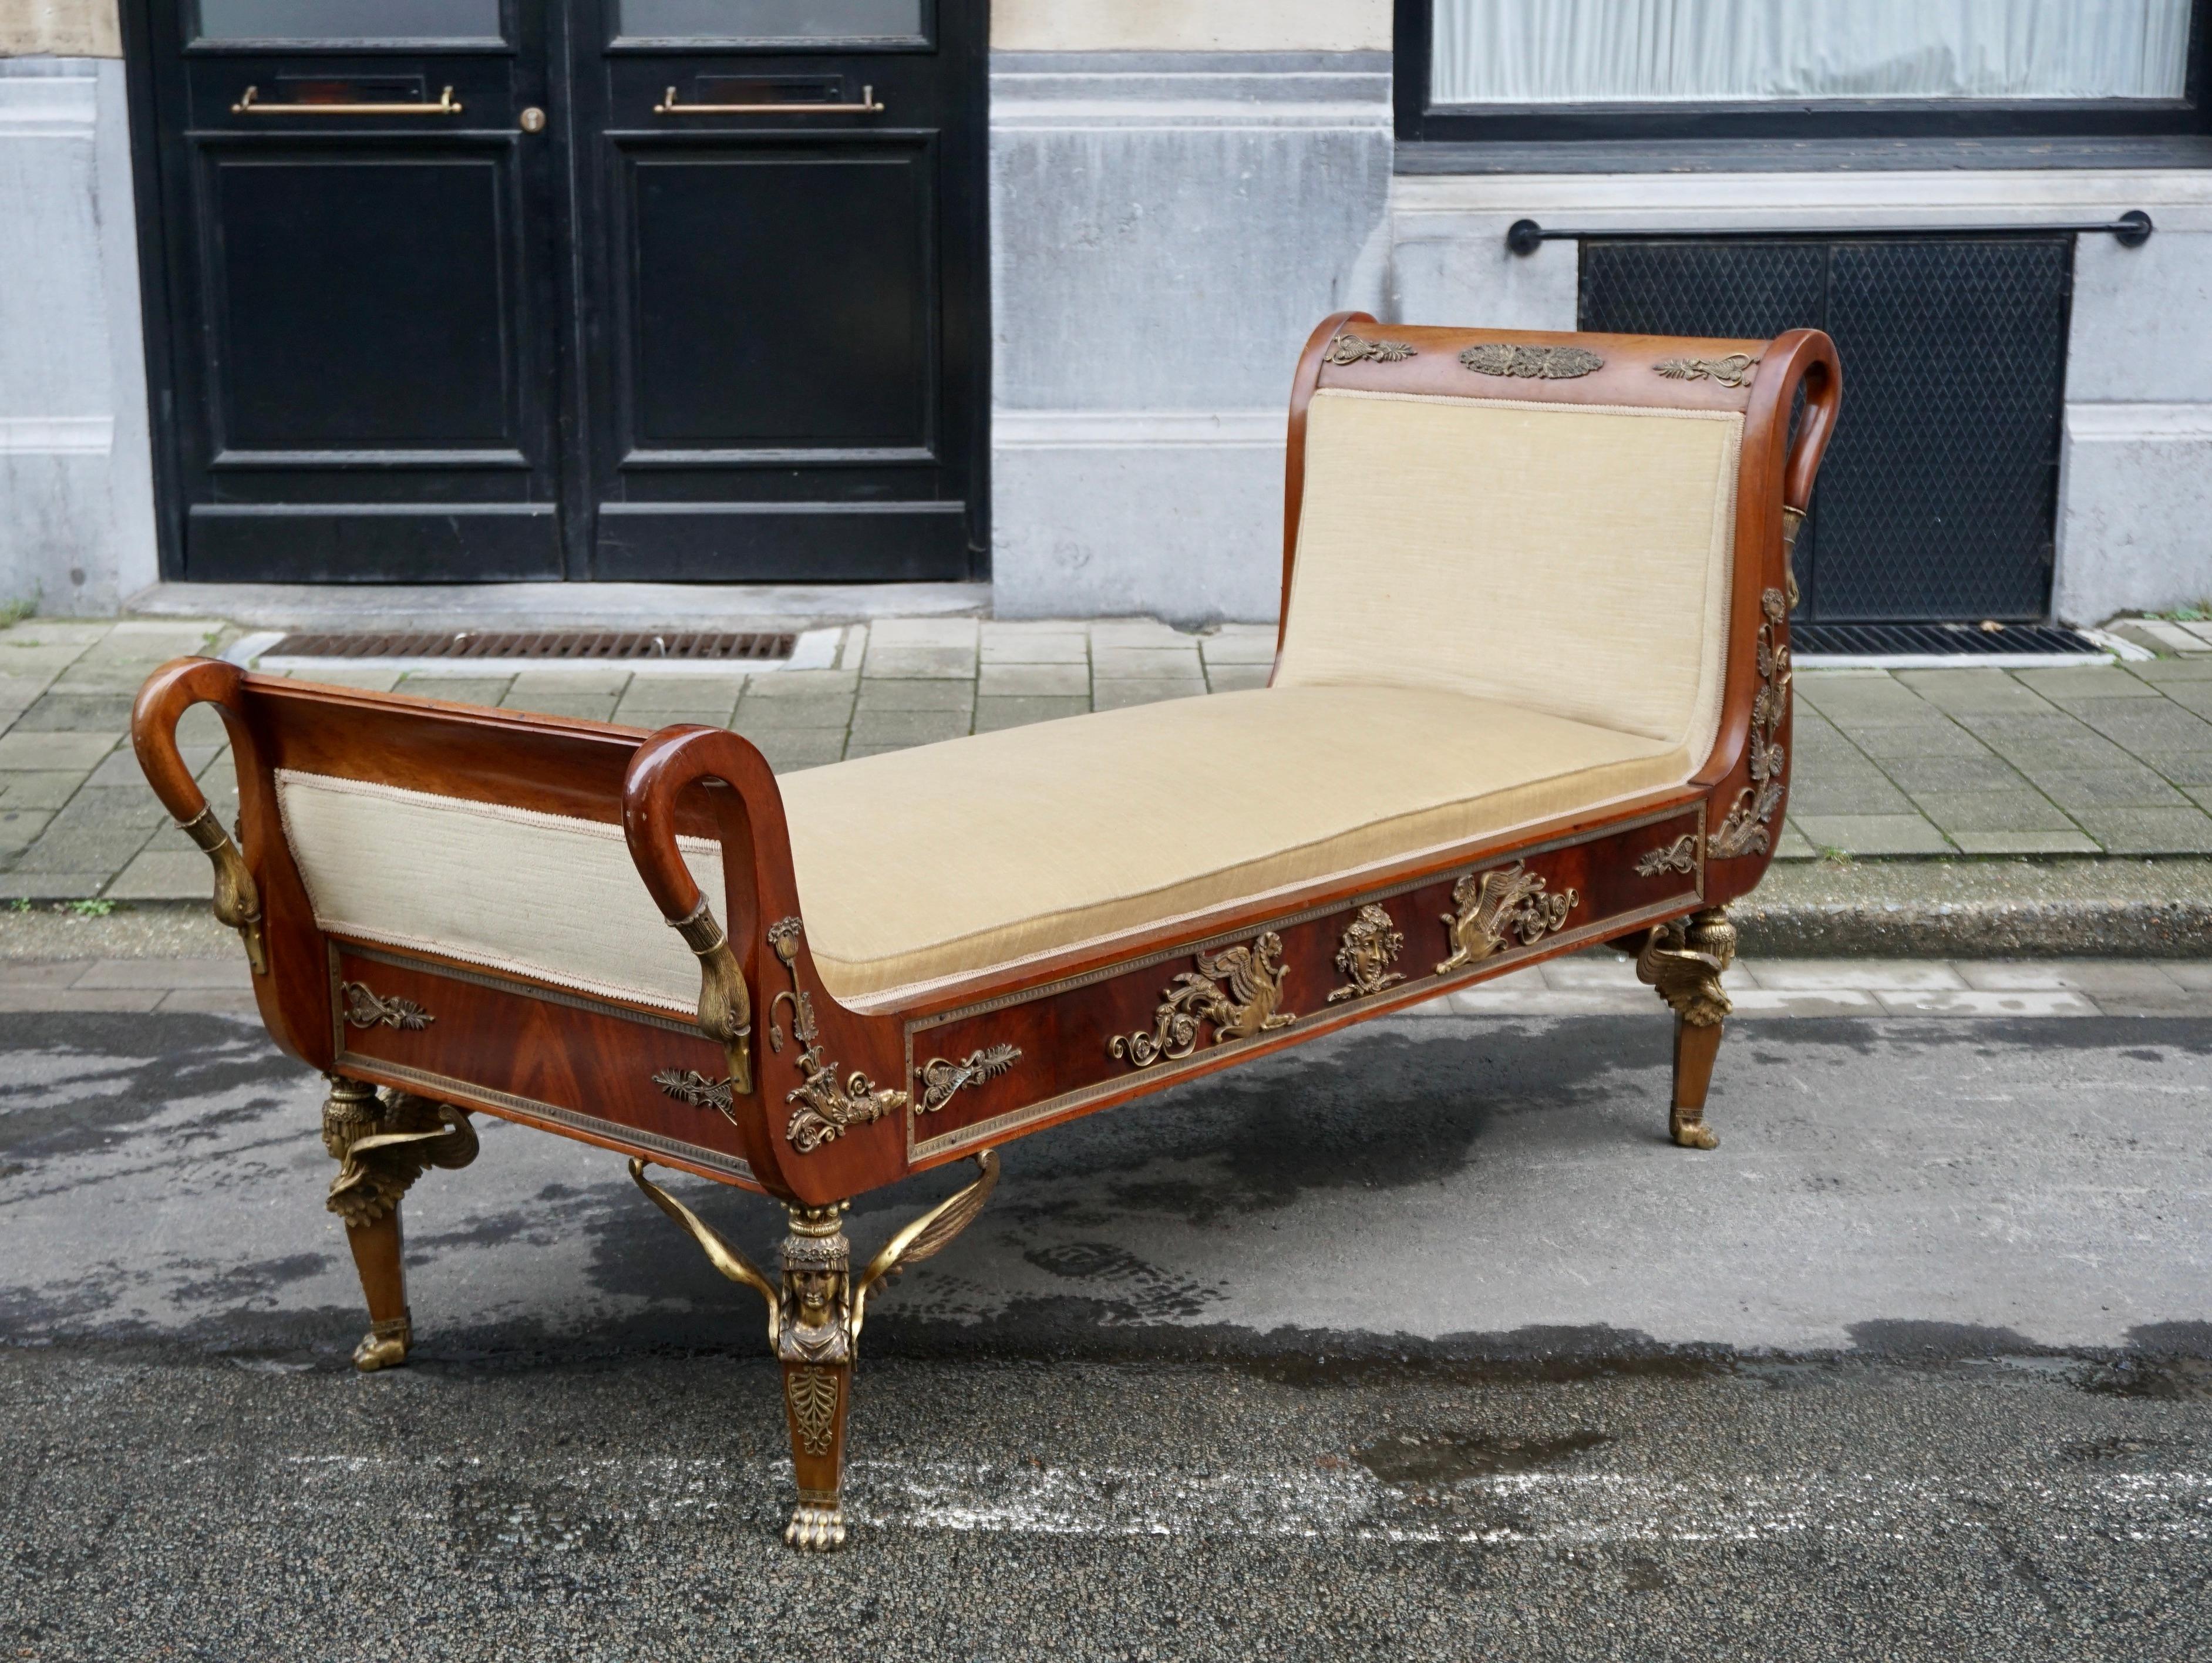 19th Century Incredible Gilt Bronze-Mounted Swan Neck Daybed in French Empire Style For Sale